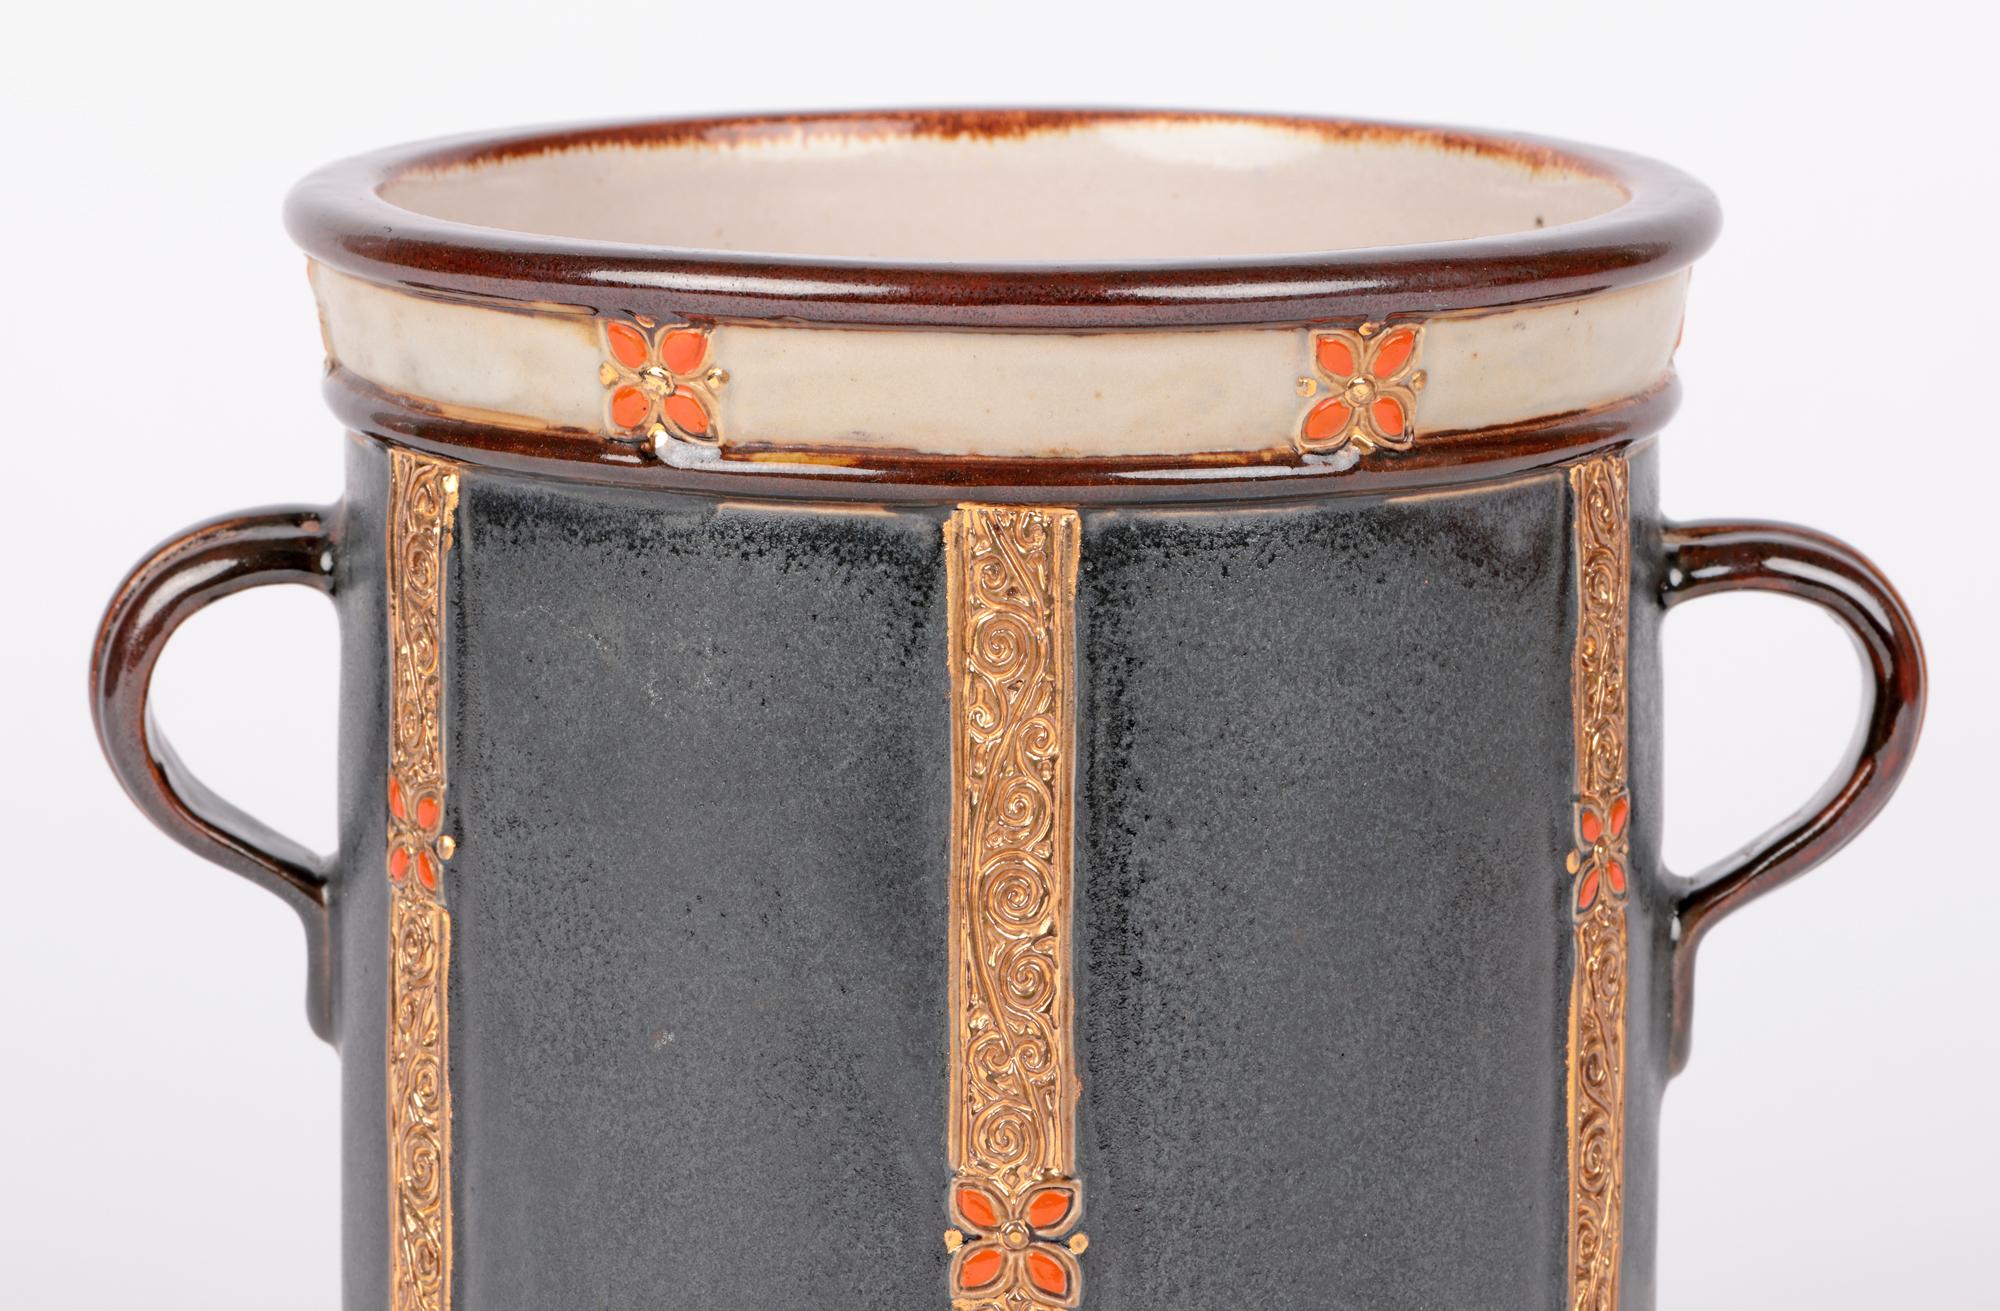 An interesting and unusual Doulton Lambeth Art Deco twin handled wine cooler designed by Maud Bowden and dating from around 1930. This large and very stylish stoneware wine cooler is of cylindrical shape standing on a wide round unglazed foot with